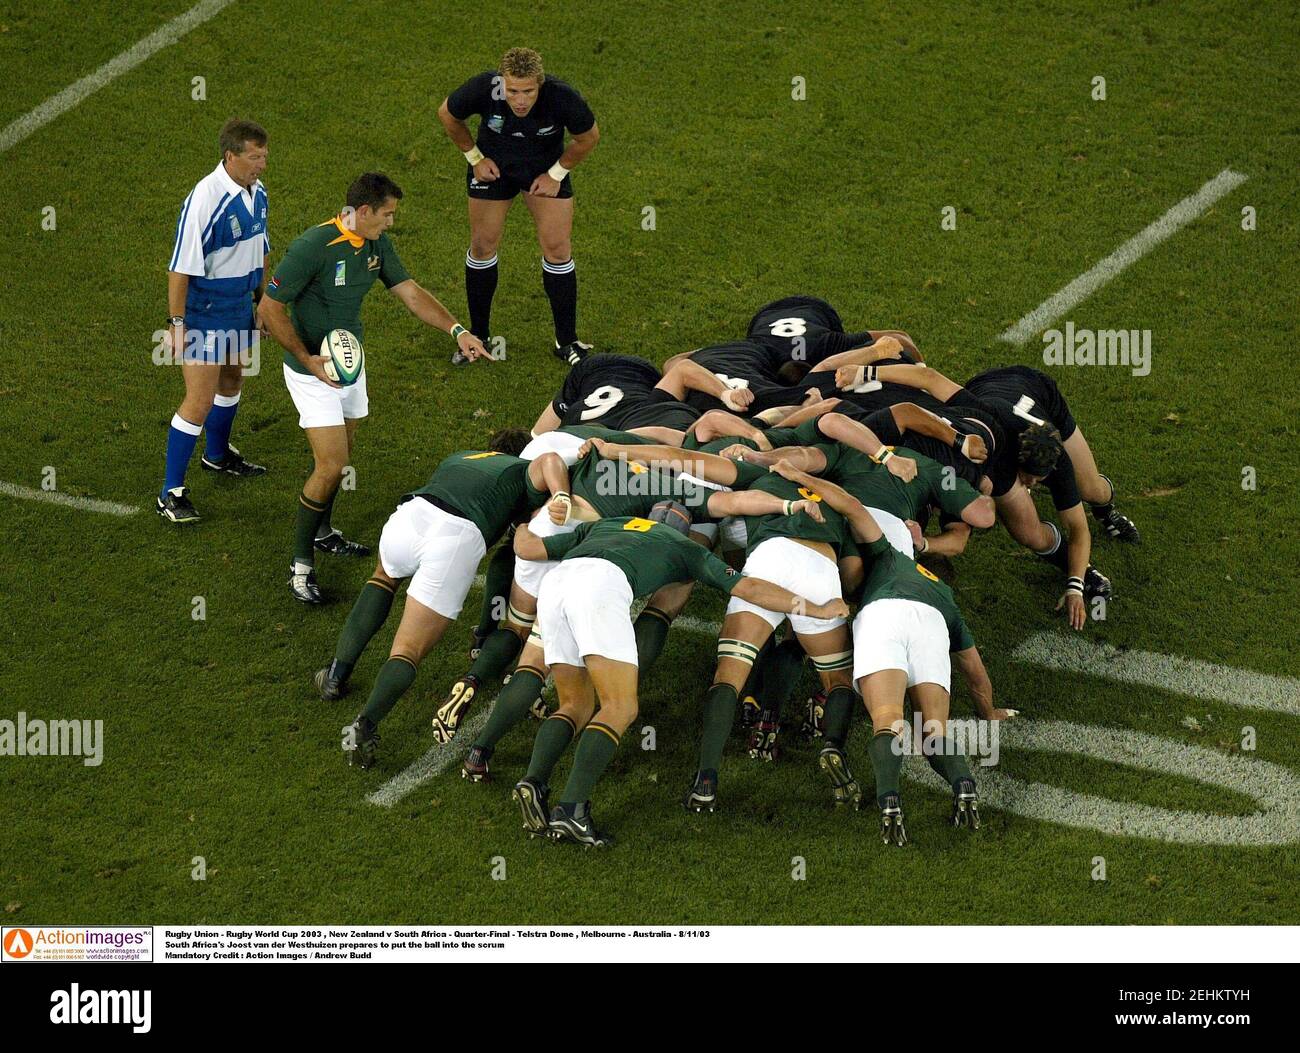 Rugby Union - Rugby World Cup 2003 , New Zealand v South Africa - Quarter-Final - Telstra Dome , Melbourne - Australia - 8/11/03  South Africa's Joost van der Westhuizen prepares to put the ball into the scrum  Mandatory Credit : Action Images / Andrew Budd Stock Photo